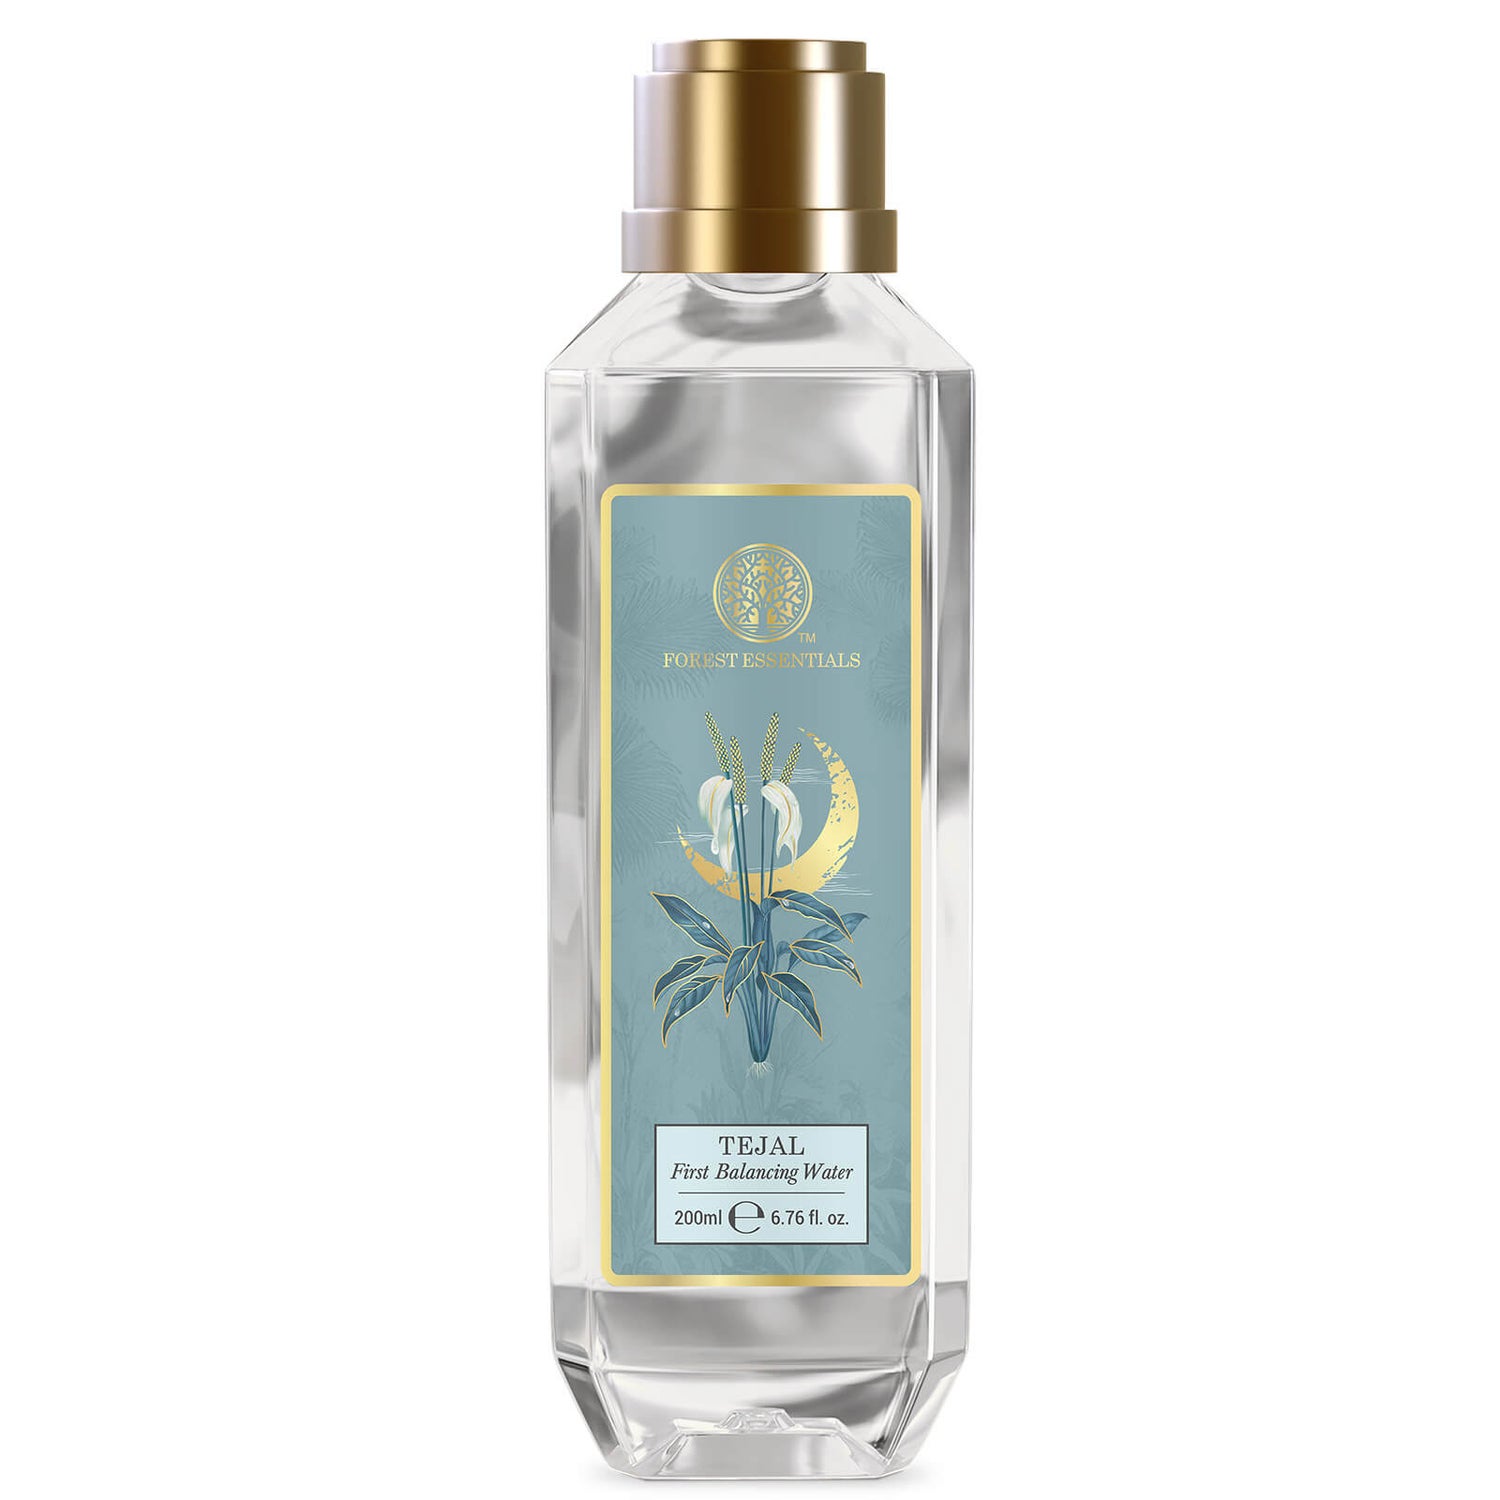 Forest Essentials Tejal First Balancing Water 200ml